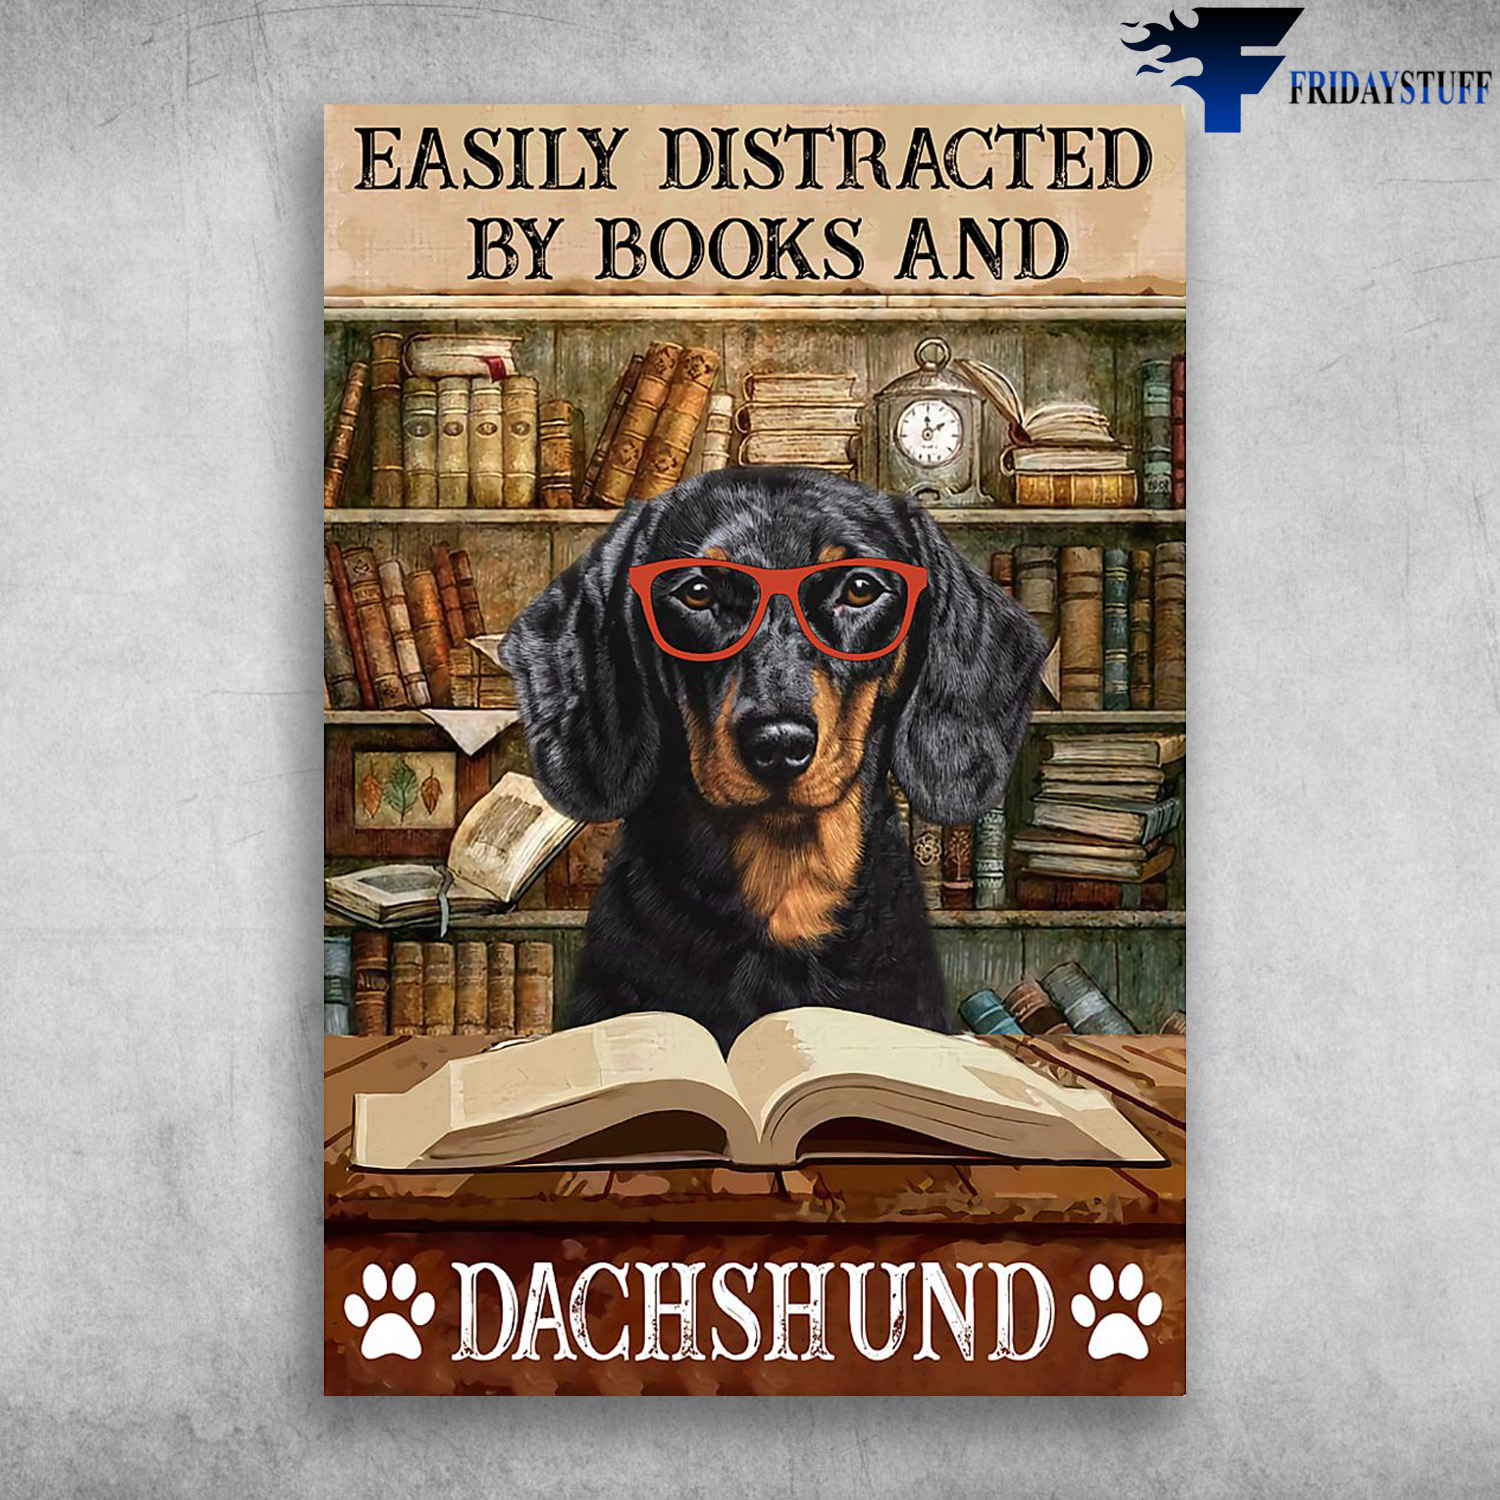 Dachshund Dog Reading Books - Easily Distracted By Books And Dachshund, Book In Library